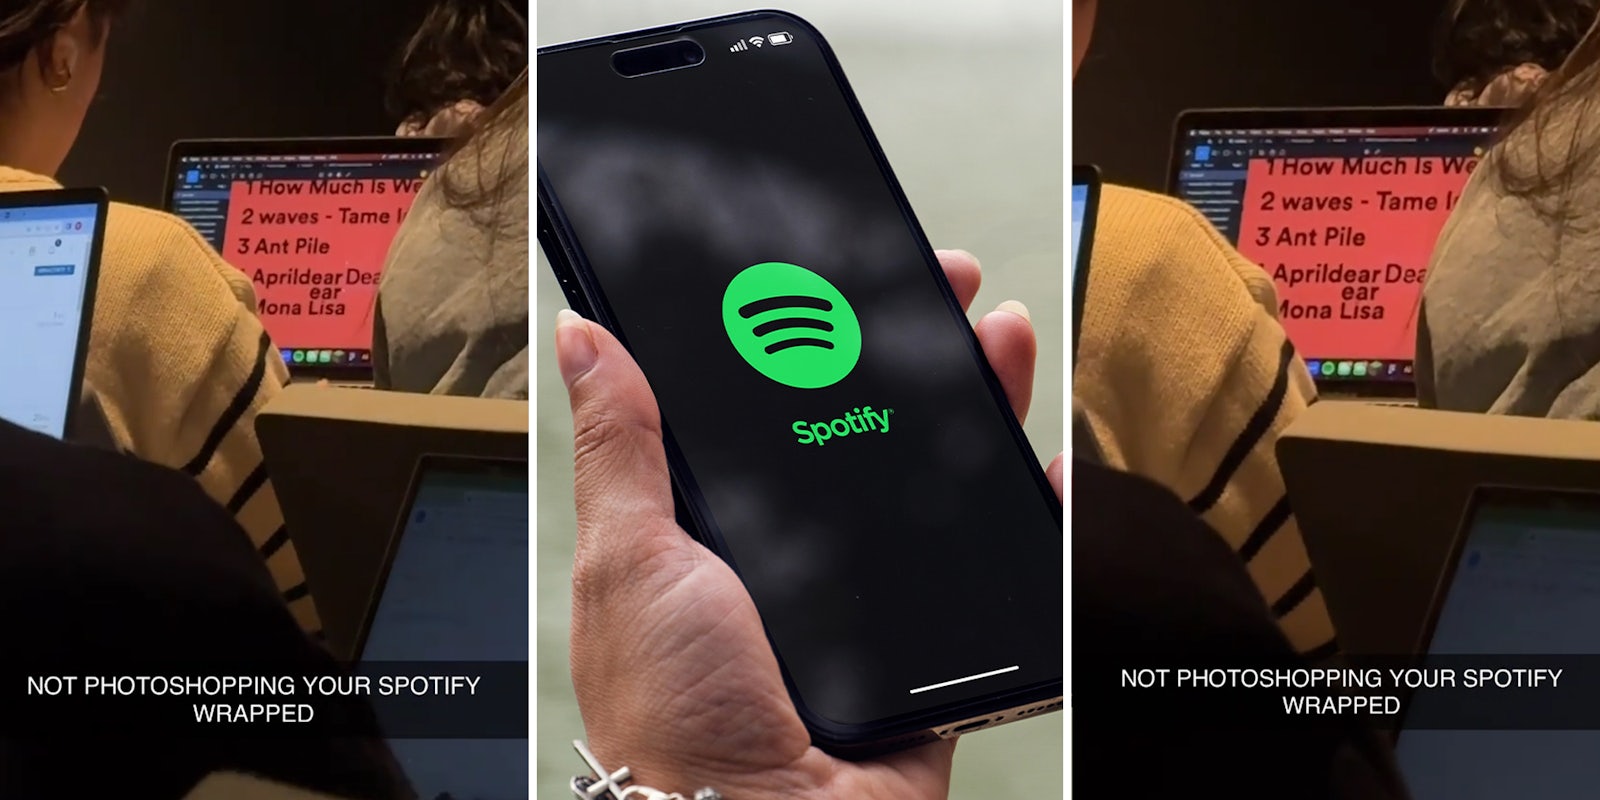 Student seen Photoshopping their Spotify wrapped during lecture